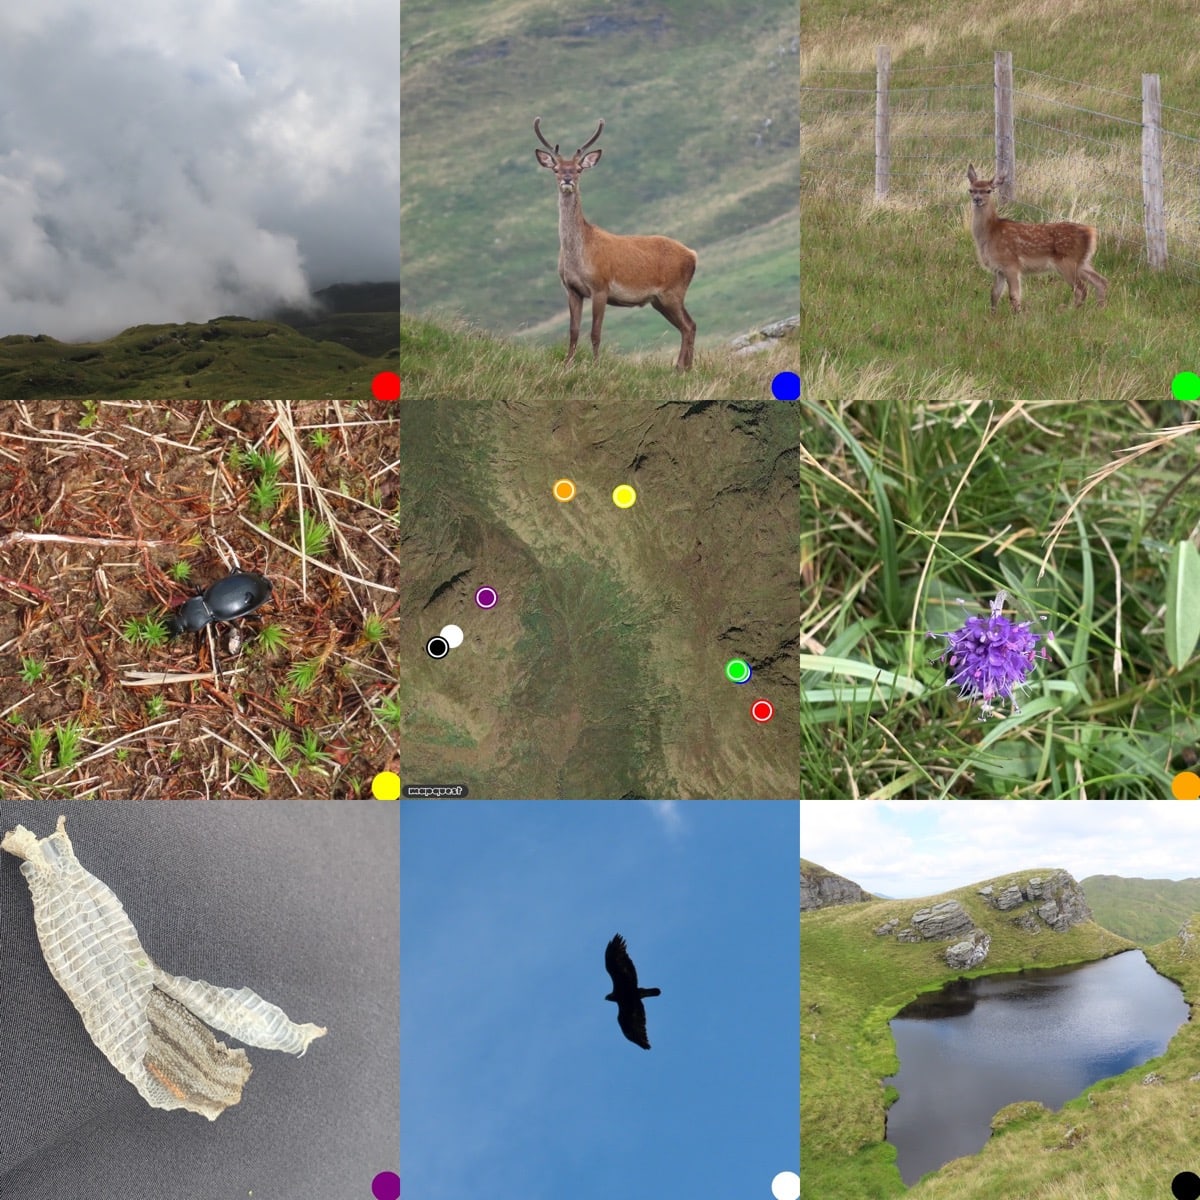 Grid of photos around a map of where they were taken, from top left: Clouds love over the hill, Red deer stag, antlers in velvet, facing camera; red deer fawn facing camera; Smooth Ground Beetle; map; Devils Bit Scabious flower head; shed skin of common lizard, sitting on black material; Golden Eagle silhouette on blue sky; small pool on Tulich hill.